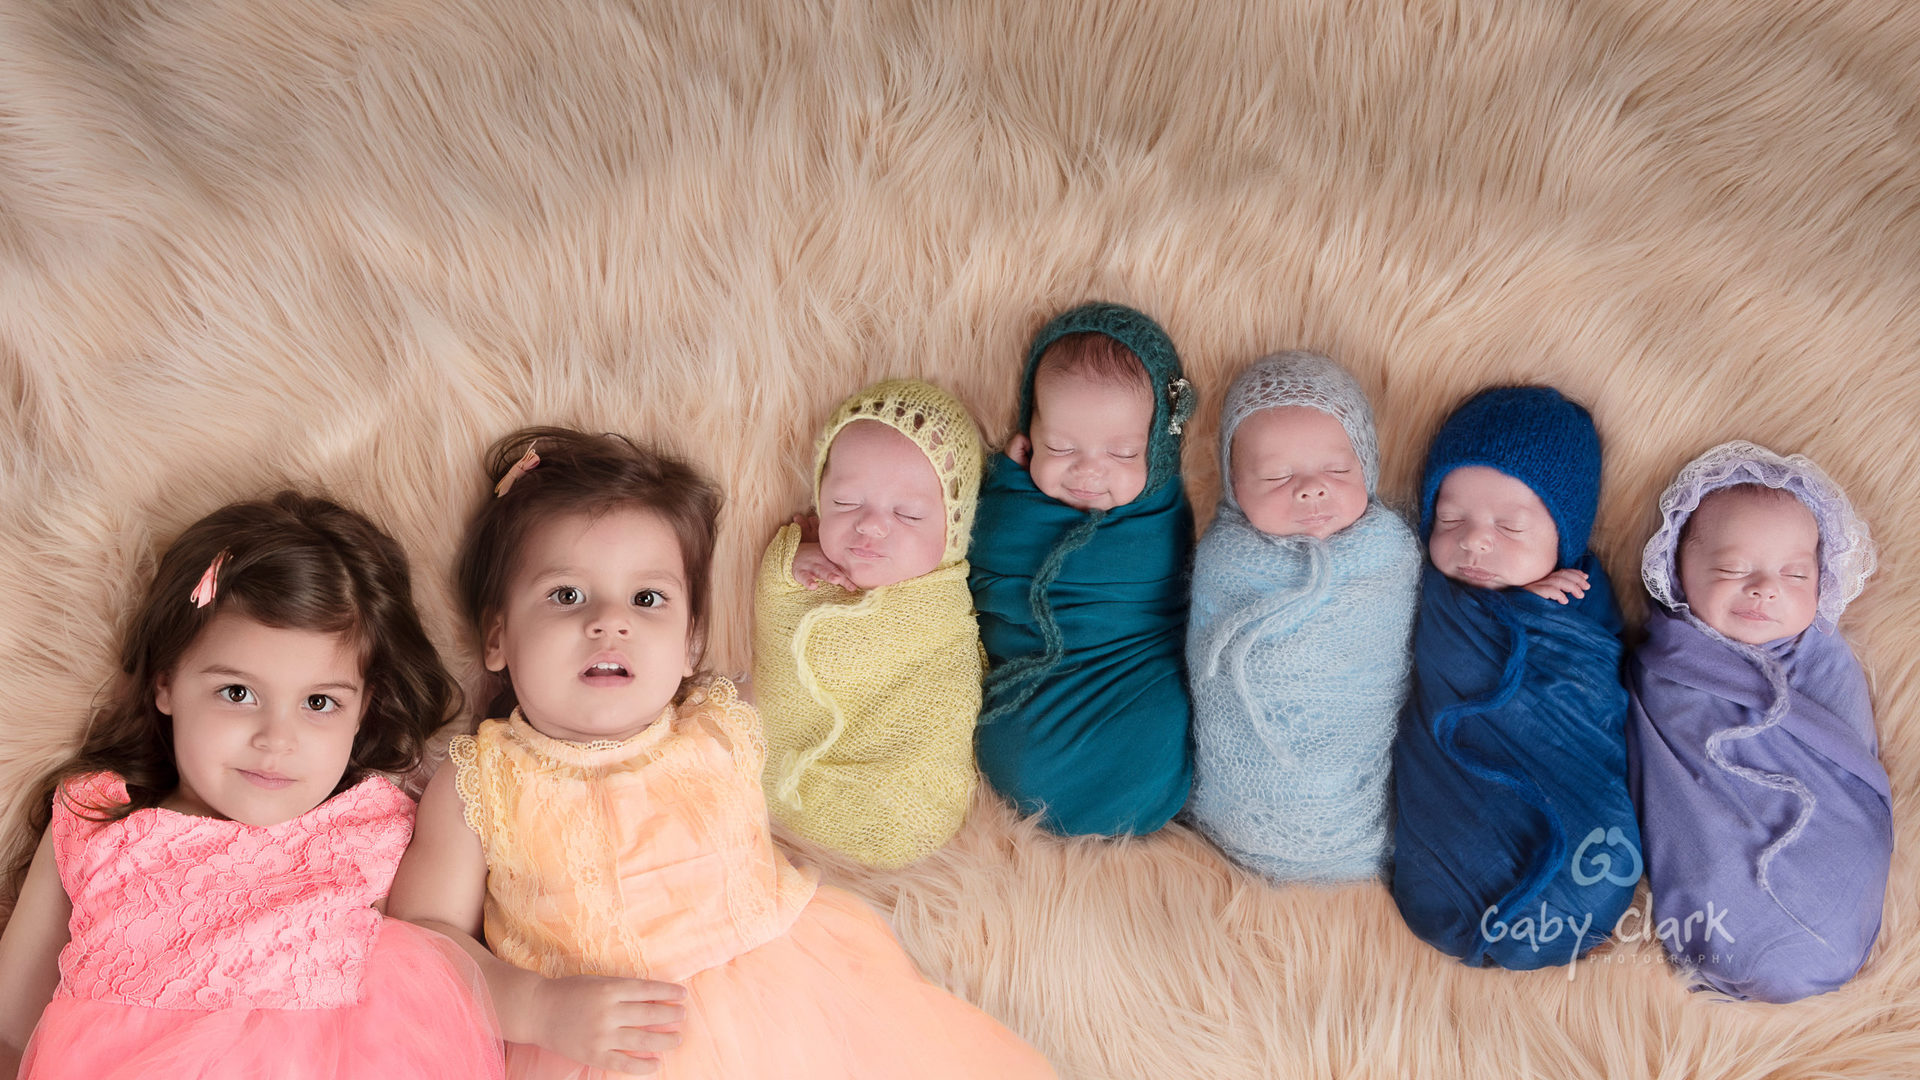 90 degrees shot shows 5 newborn siblings and their older sisters. Light brown fluffy carpet background. One different color is assigned to each child. Pink, yellow, yellow, green, light blue, dark blue & purple.